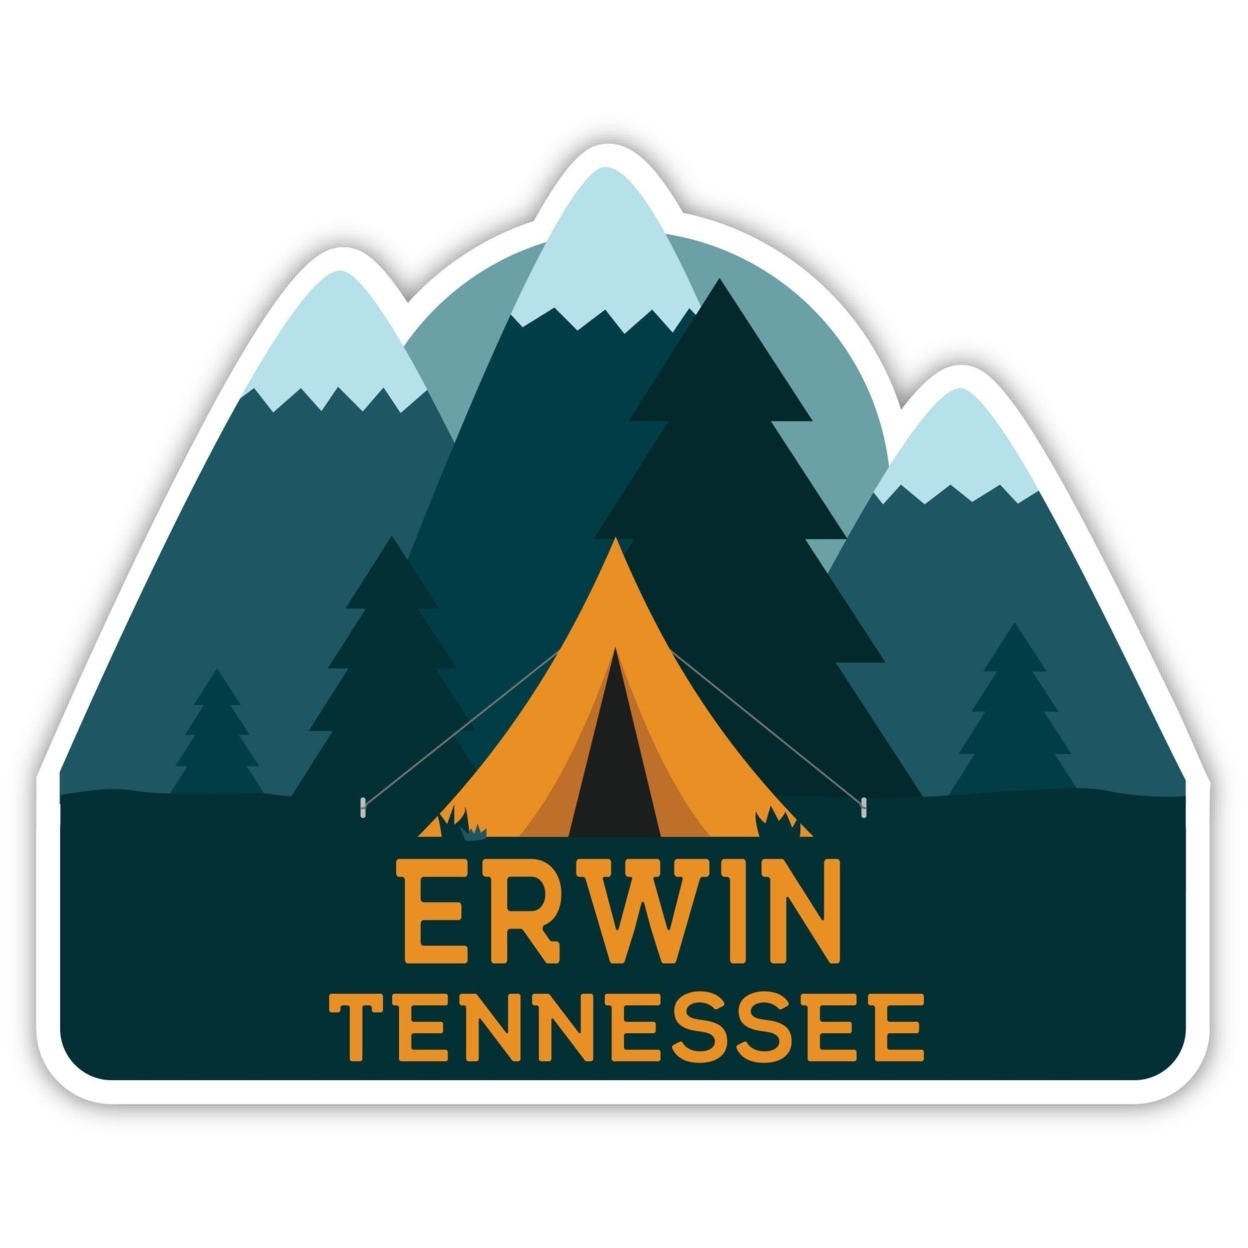 Erwin Tennessee Souvenir Decorative Stickers (Choose Theme And Size) - Single Unit, 6-Inch, Tent